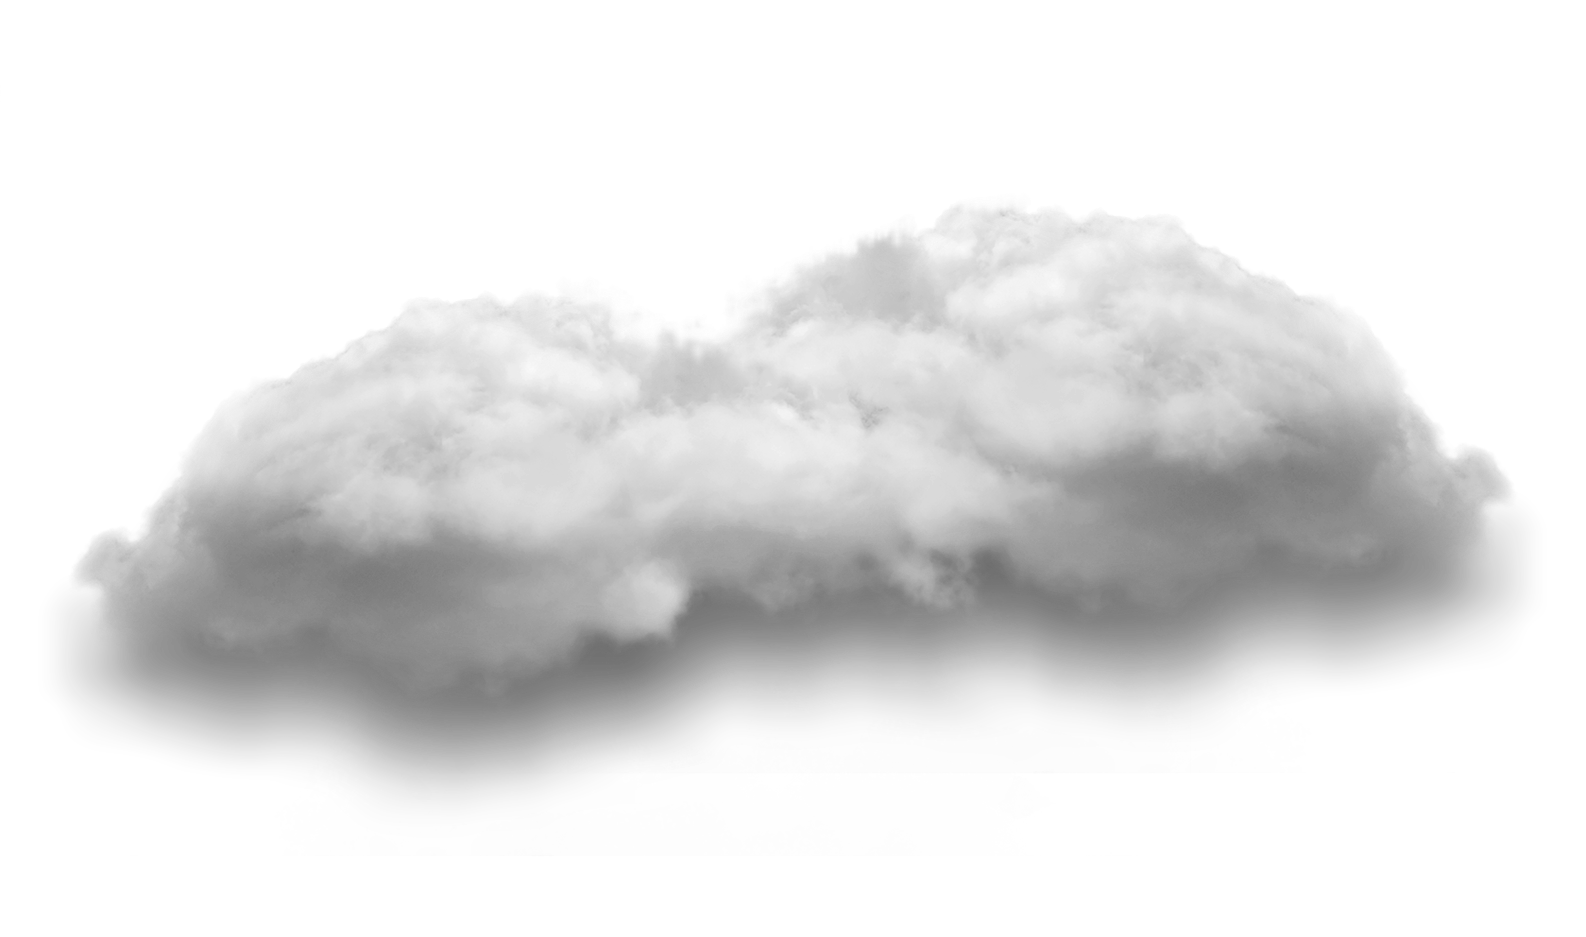 image of clouds